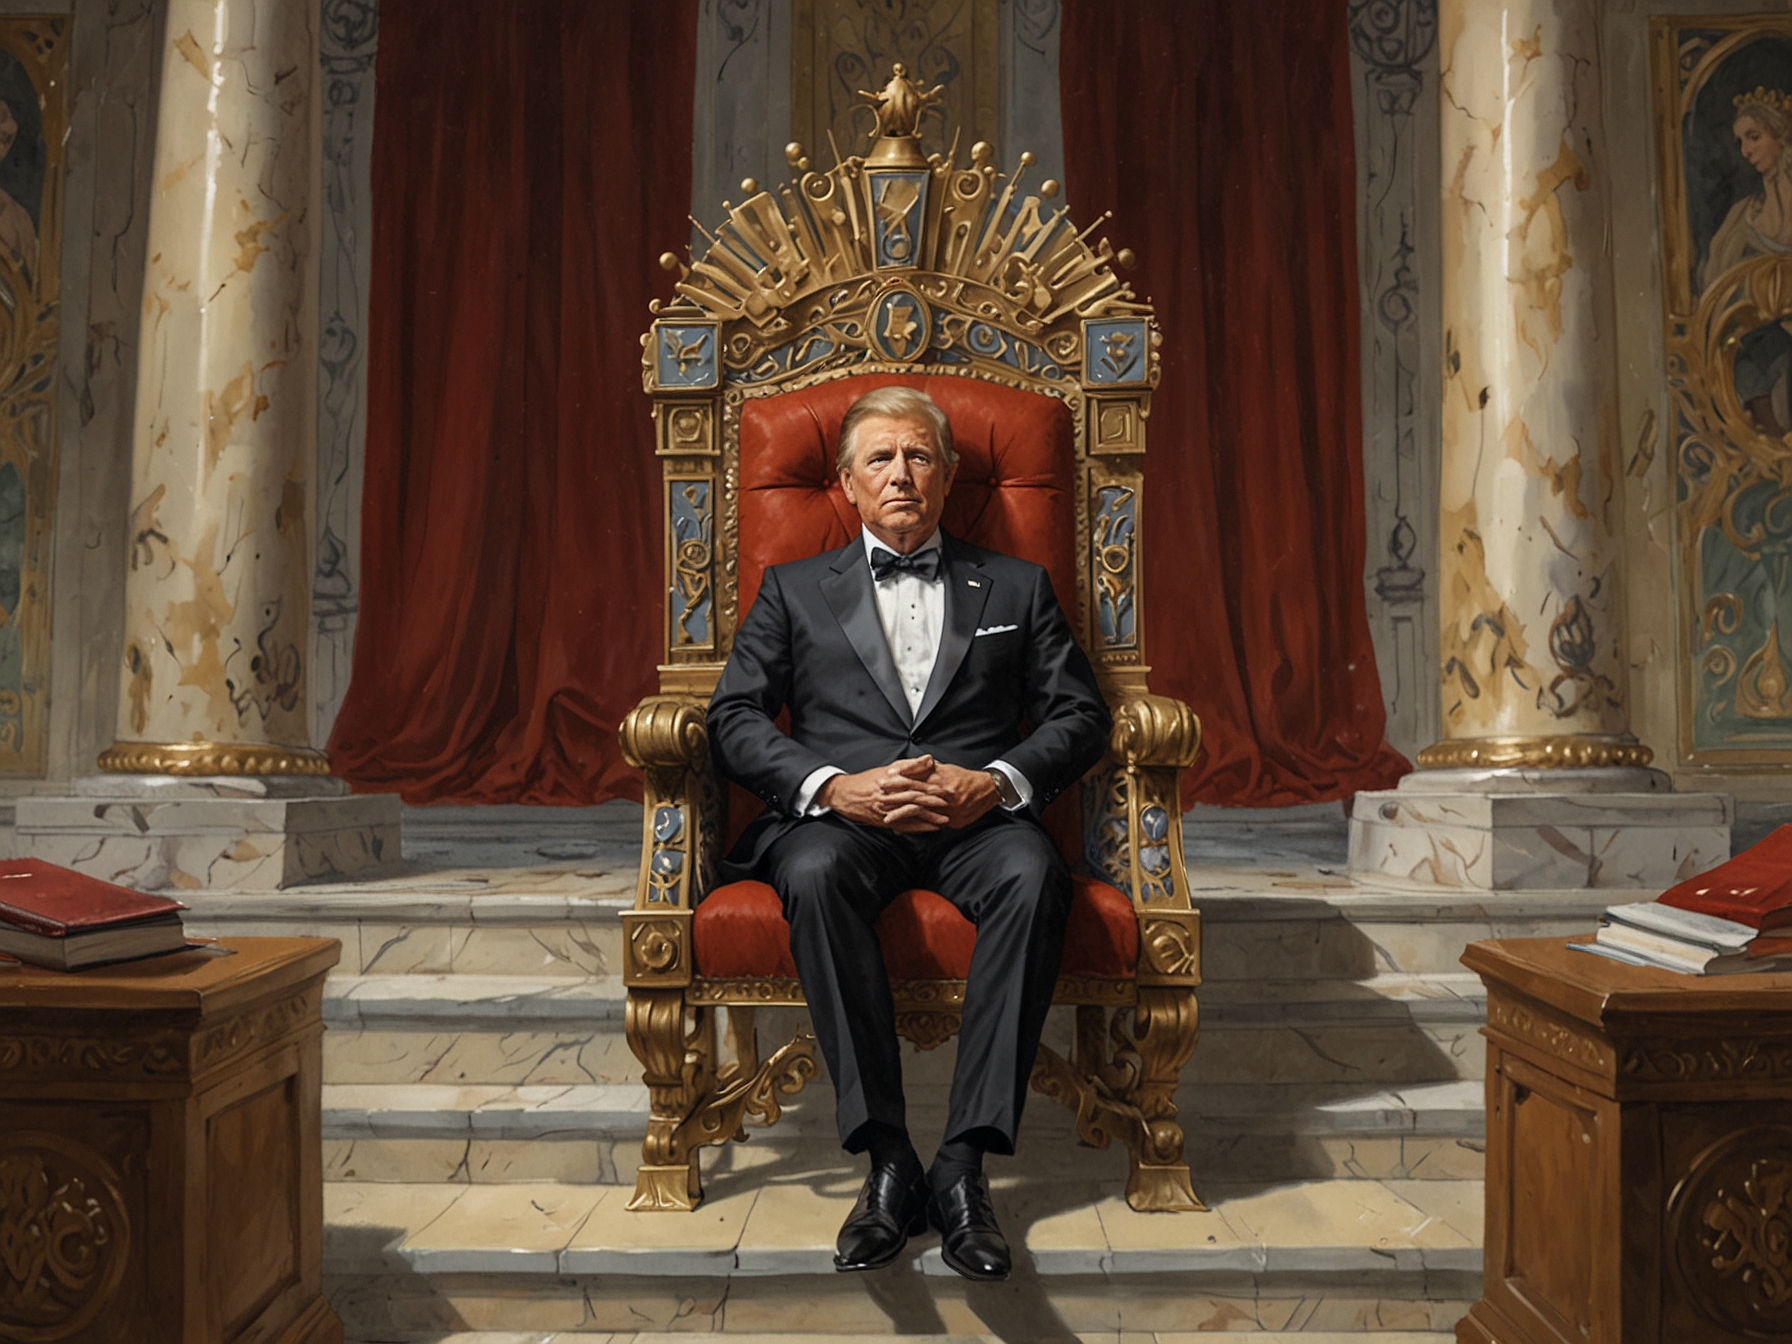 A satirical cartoon by Adam Zyglis depicting the President on a grand throne wearing regal attire and a crown, symbolizing the perceived unchecked expansion of executive power.